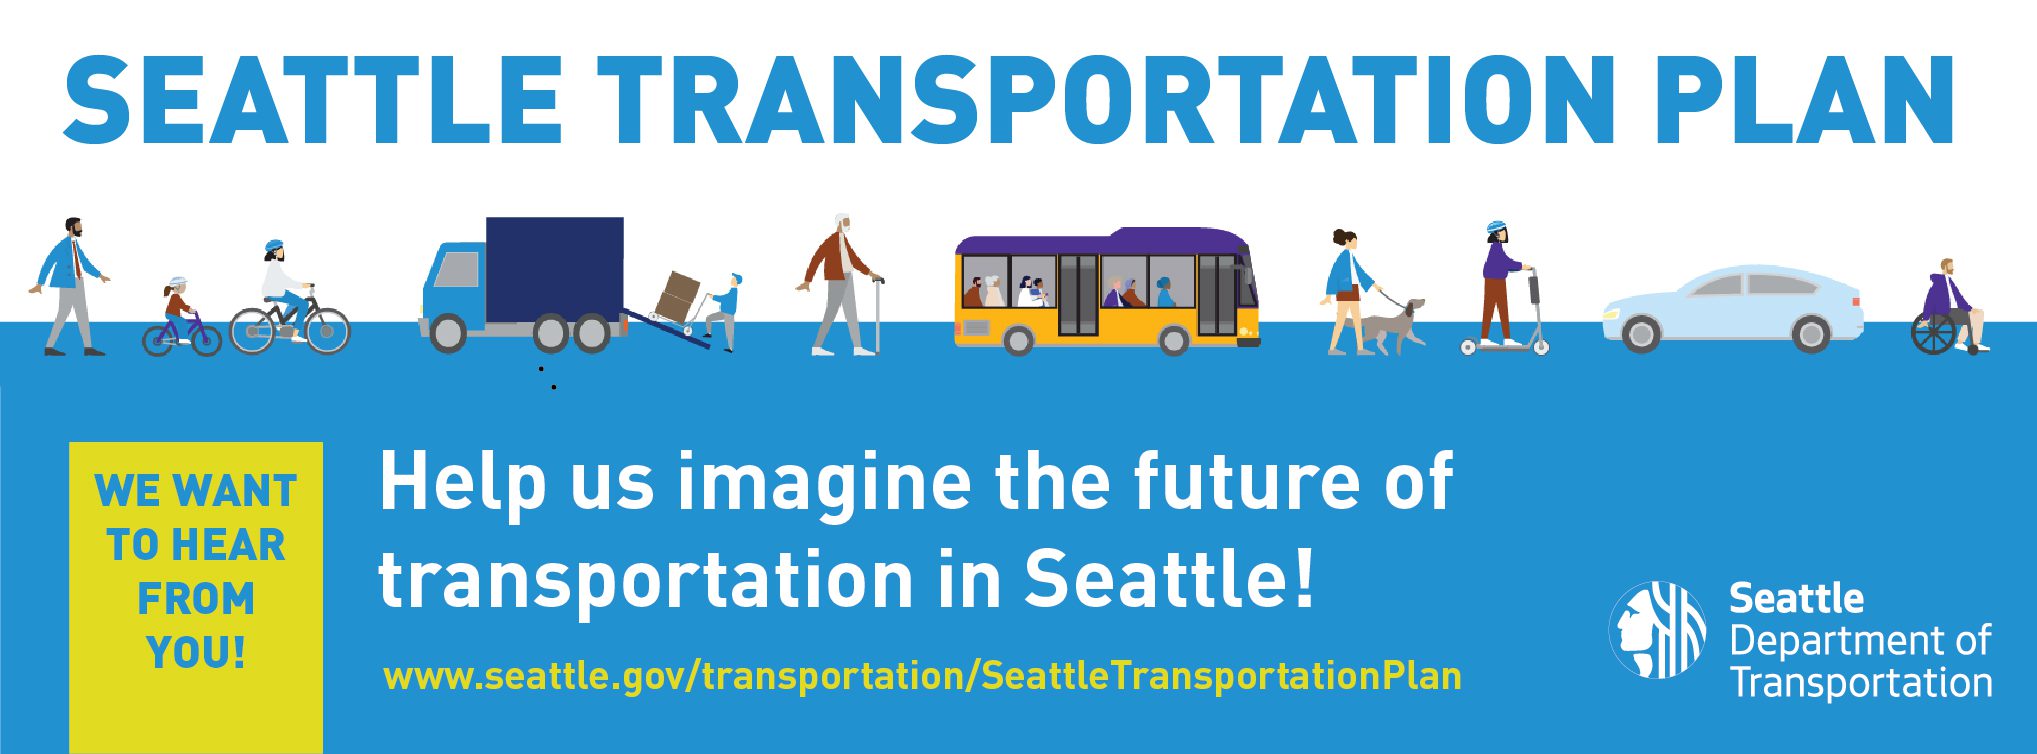 The Seattle Transportation Plan.  We want to hear from you!  Help us envision the future of transportation in Seattle at www.seattle.gov/transportation/SeattleTransportationPlan